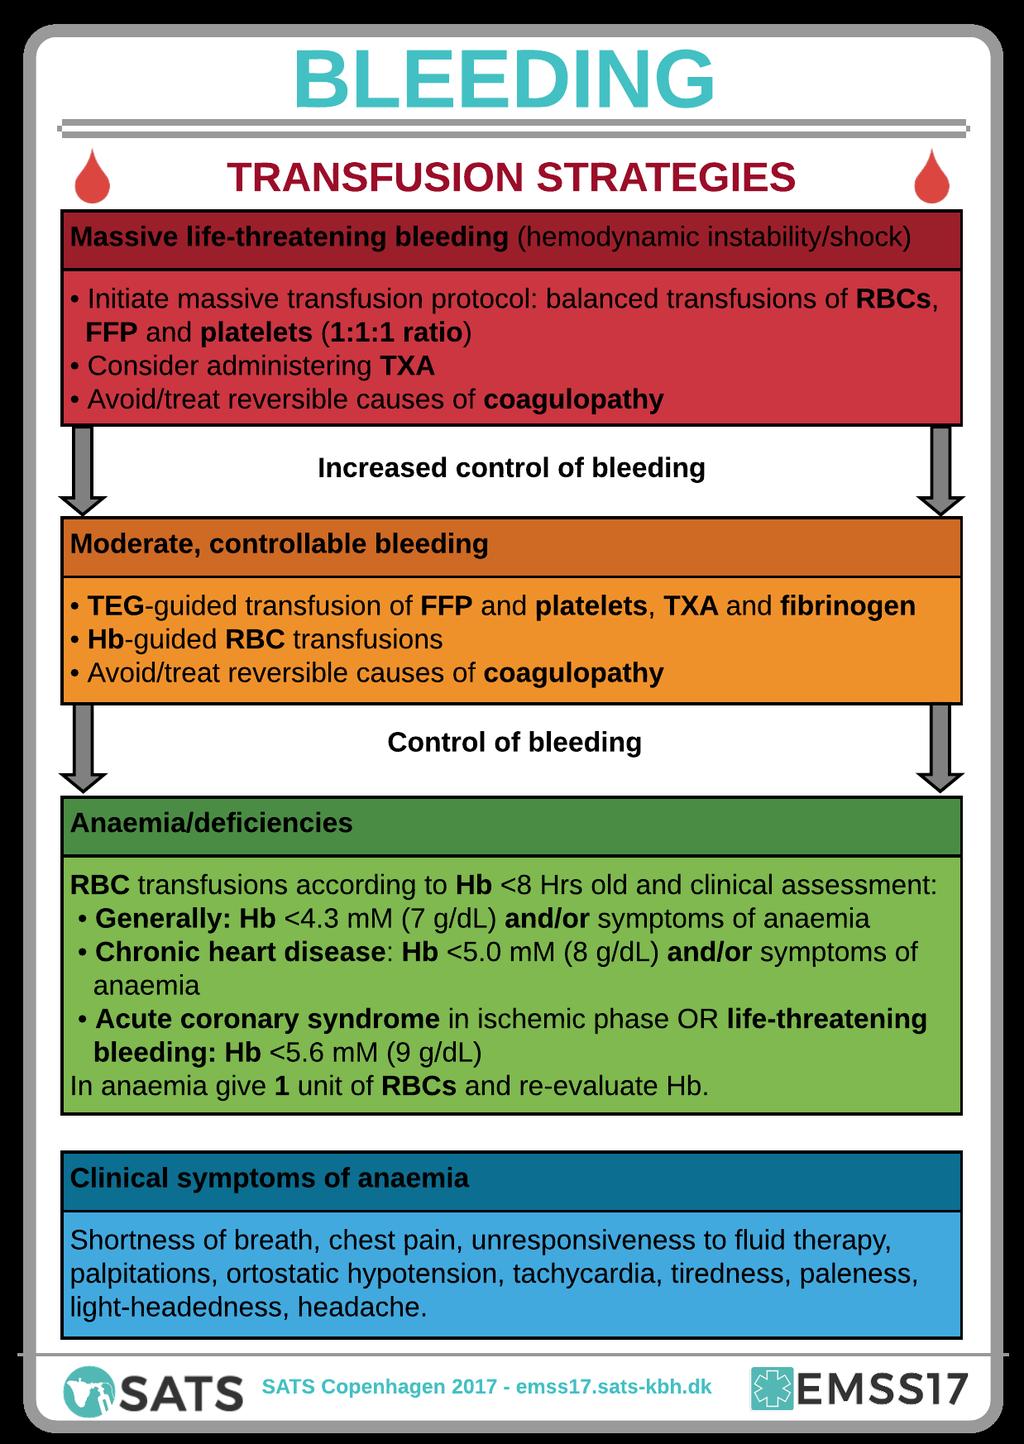 Bleeding different situations The pocket guide presents transfusion strategies for the three different situations mentioned in the beginning (page 1 of the pocket guide, downloadable at the website):